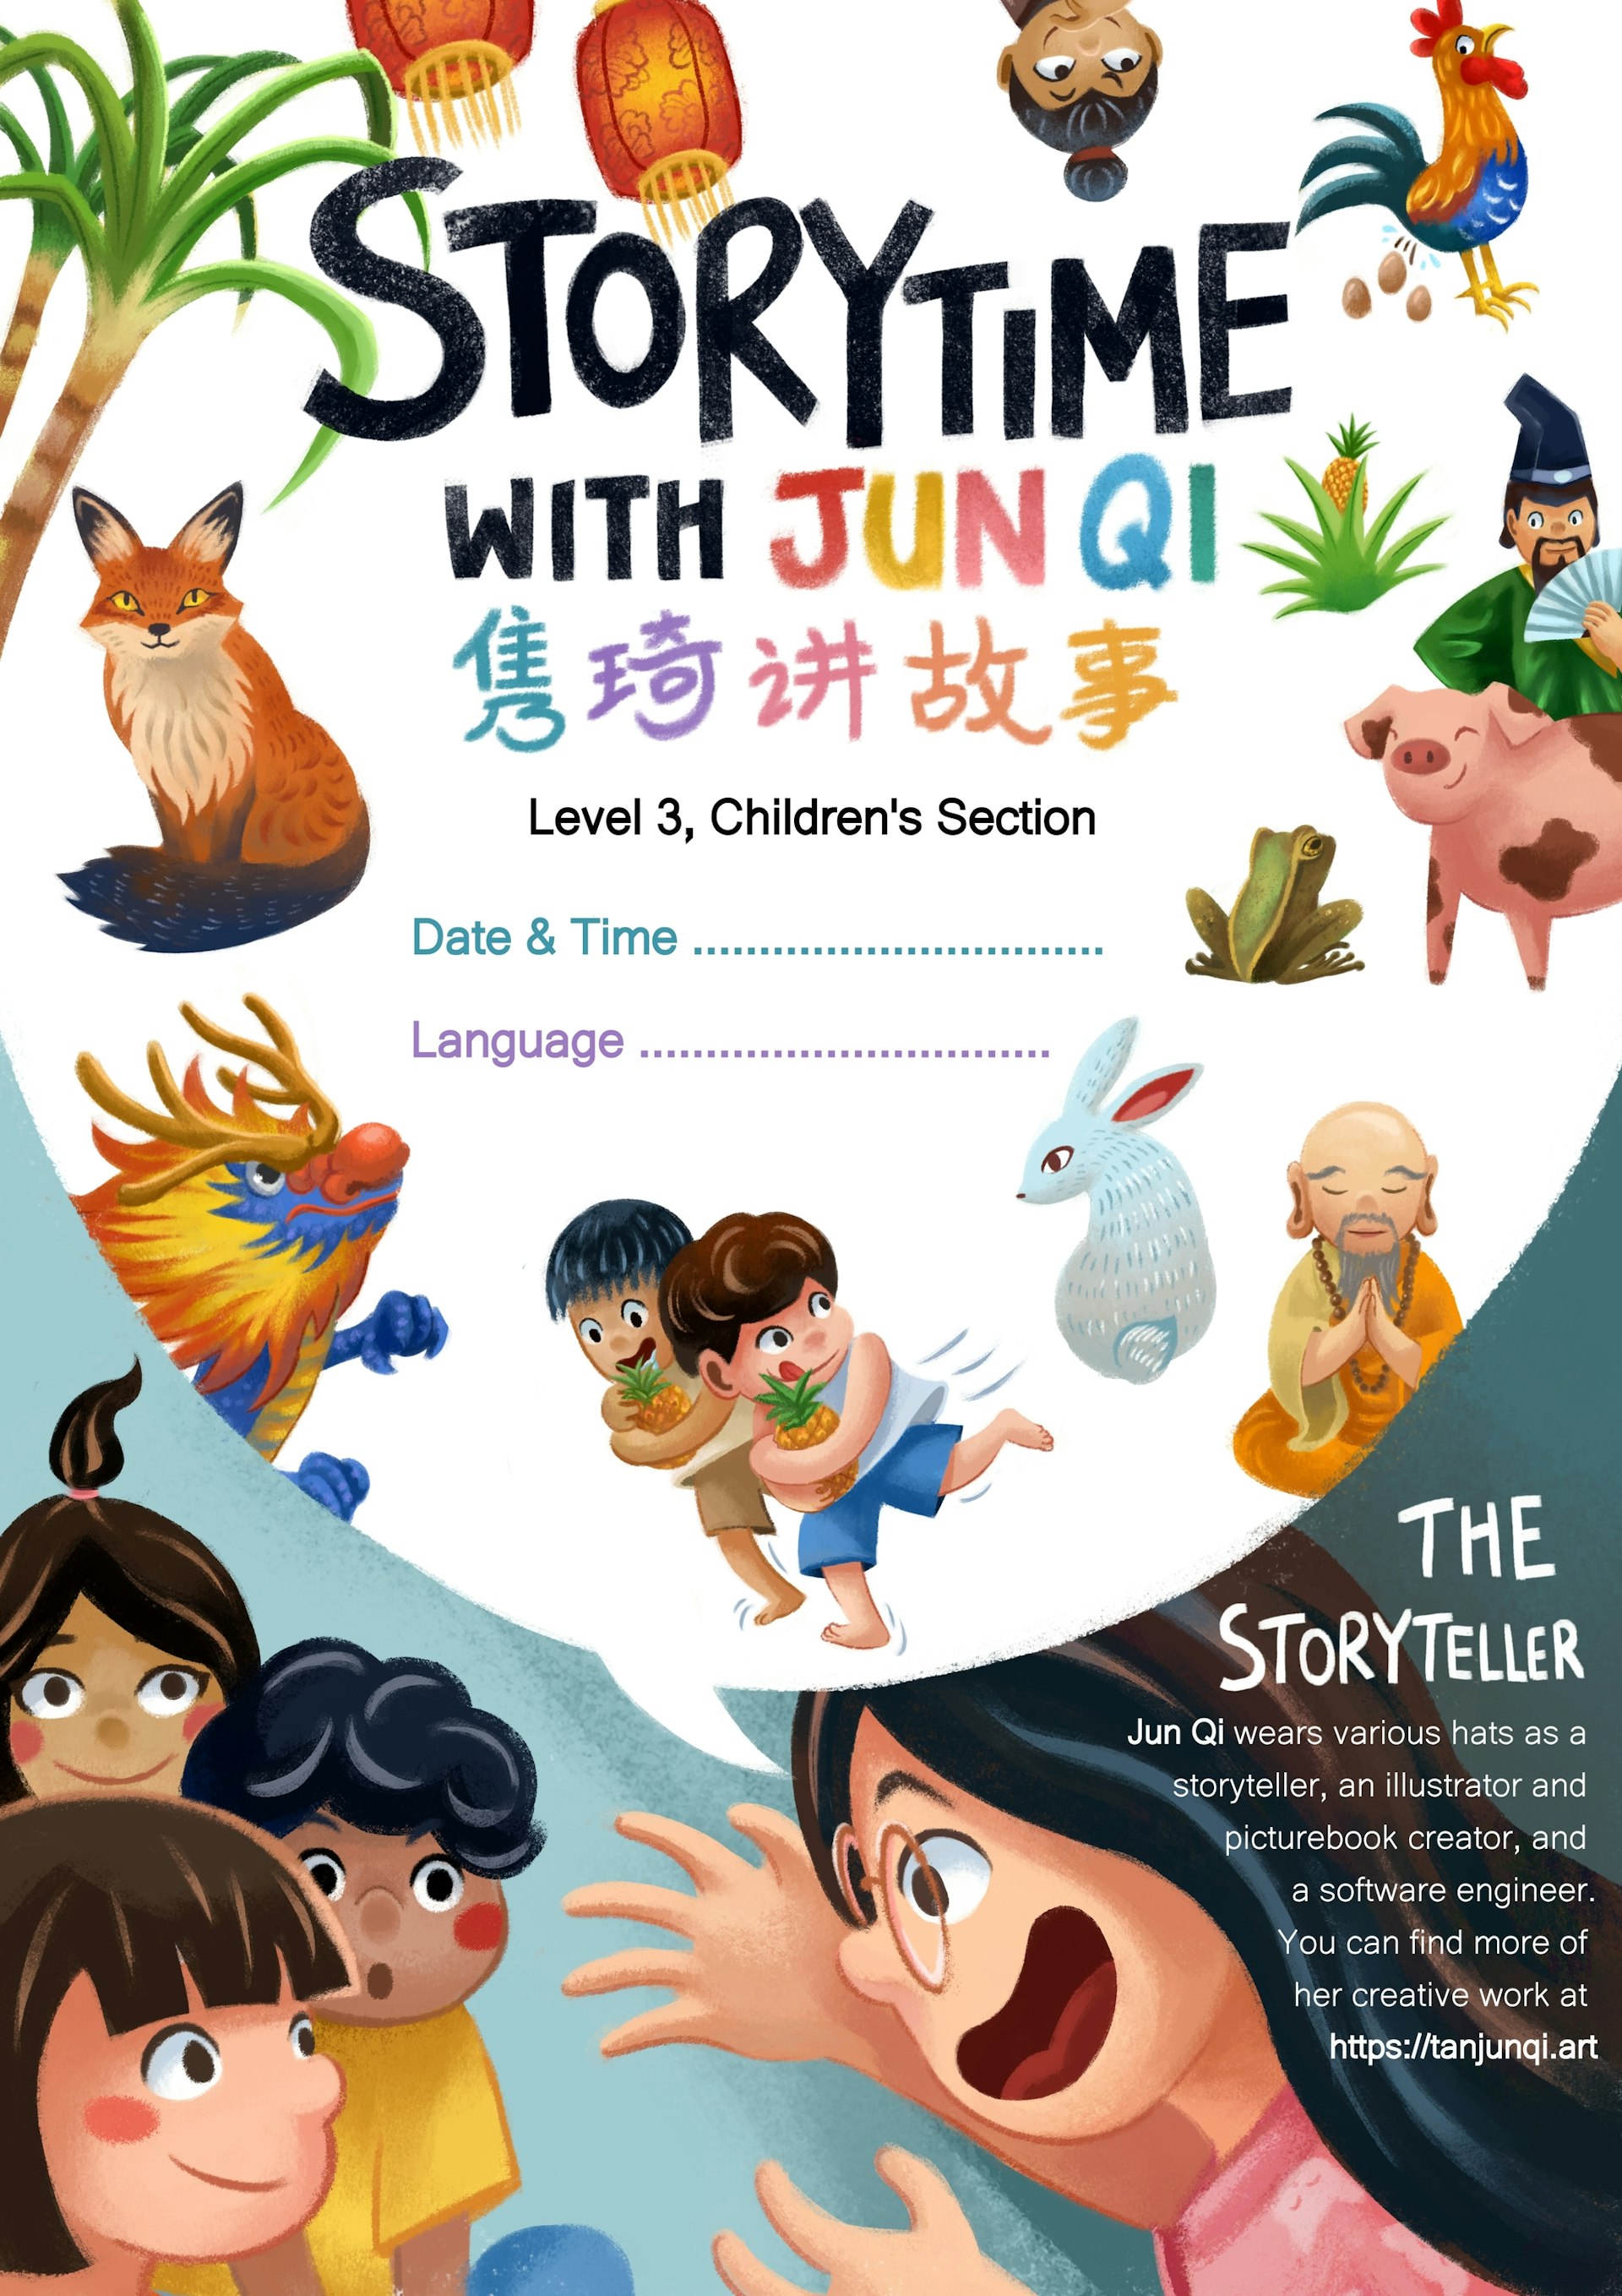 Digital painting and poster design for my storytelling sessions at Bedok Library. It shows a caricature of me, hands gesturing as I tell a story to an audeince of children. The speech bubble that comes from my mouth are filled with the colorful characters from my various stories, surrounding the poster title: Storytime with Jun Qi, in English and Mandarin